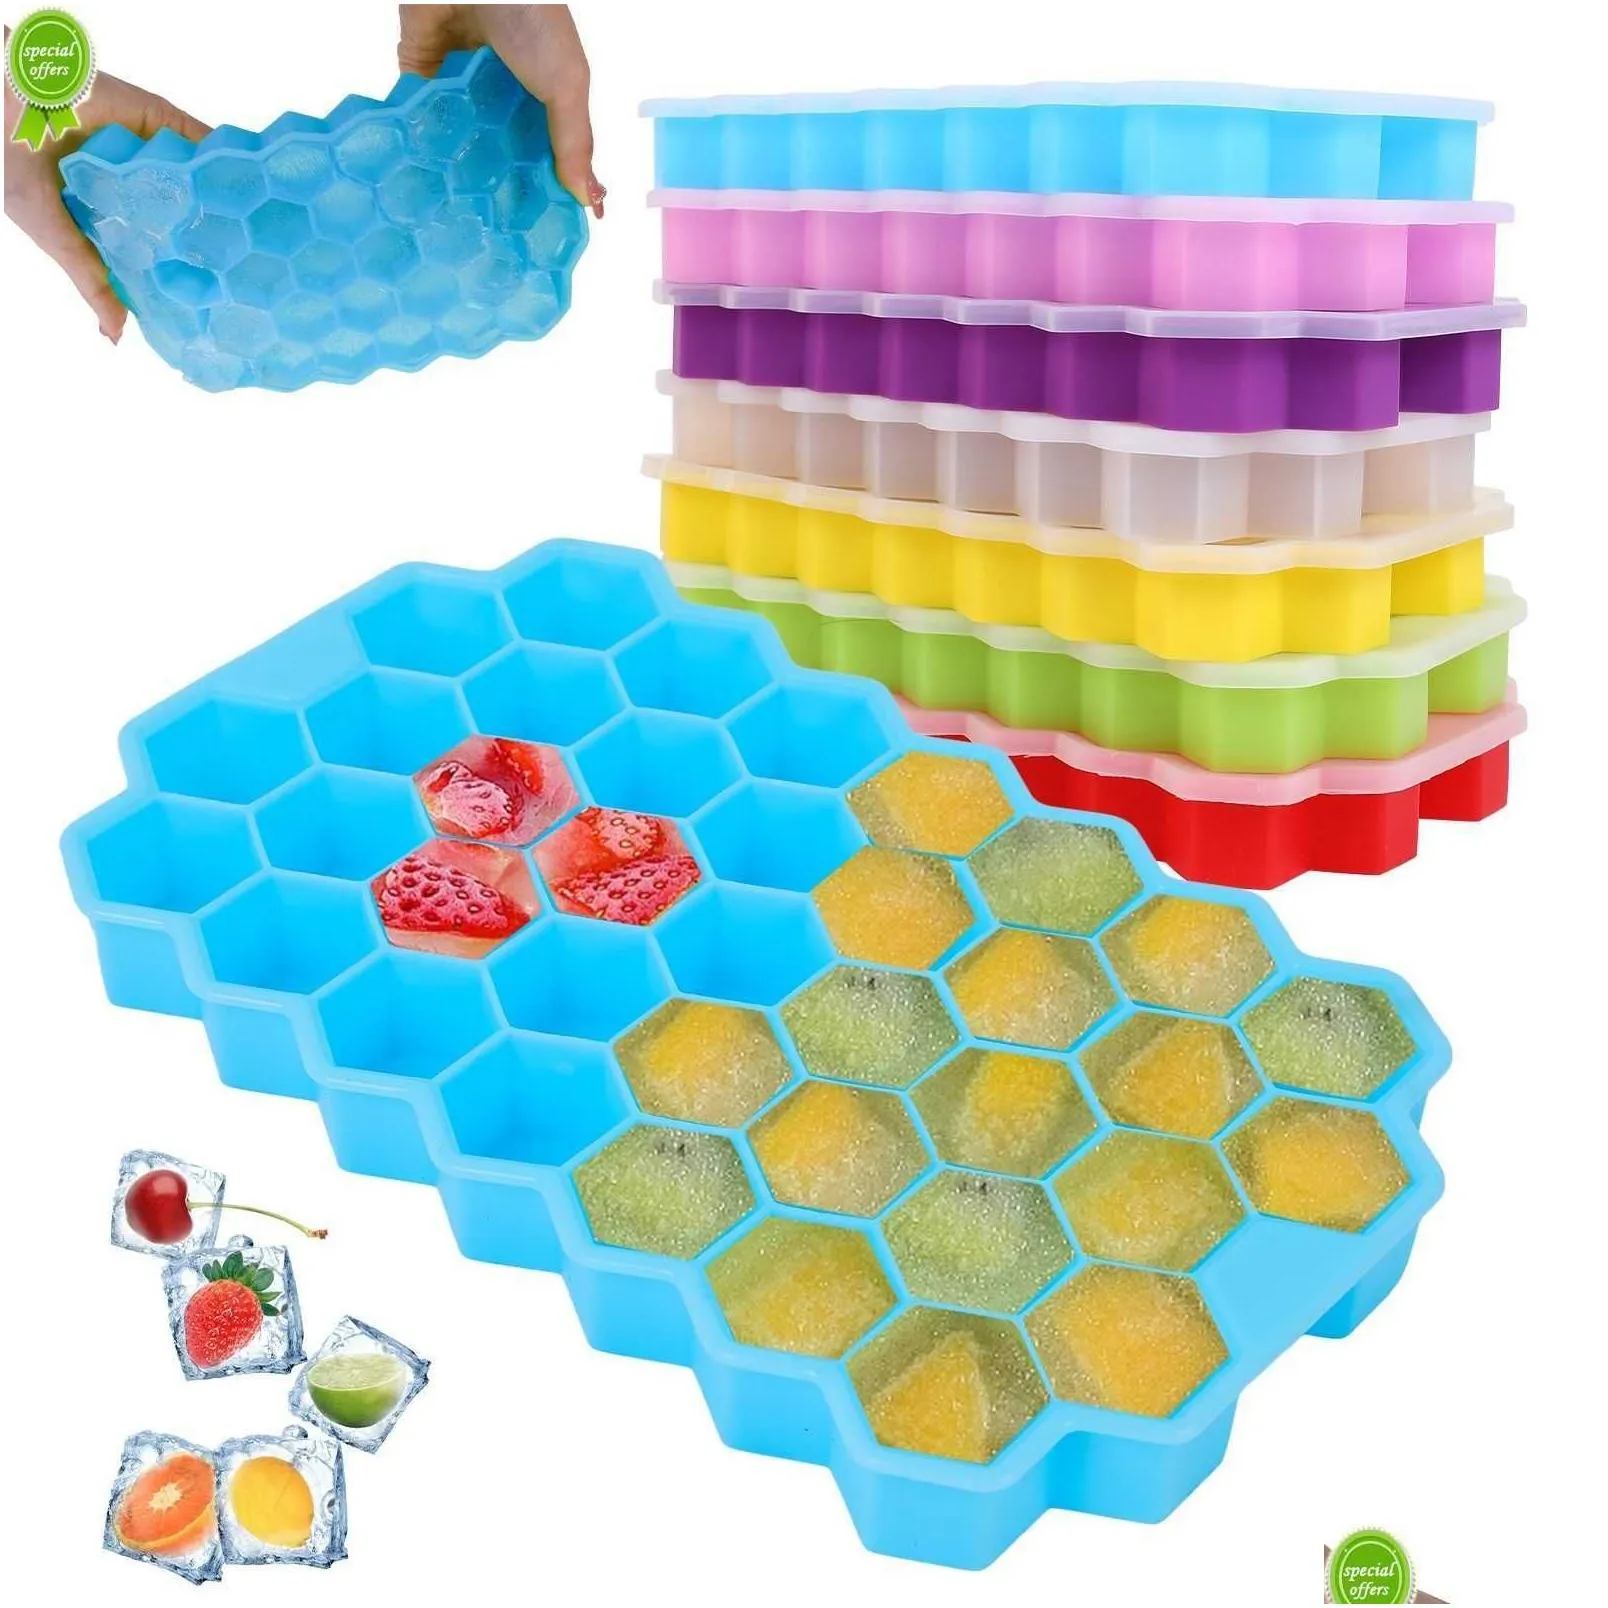  37 cavity cube maker silicones ice mould honeycomb ice cube tray magnum silicone mold forms food grade mold for whiskey cocktail